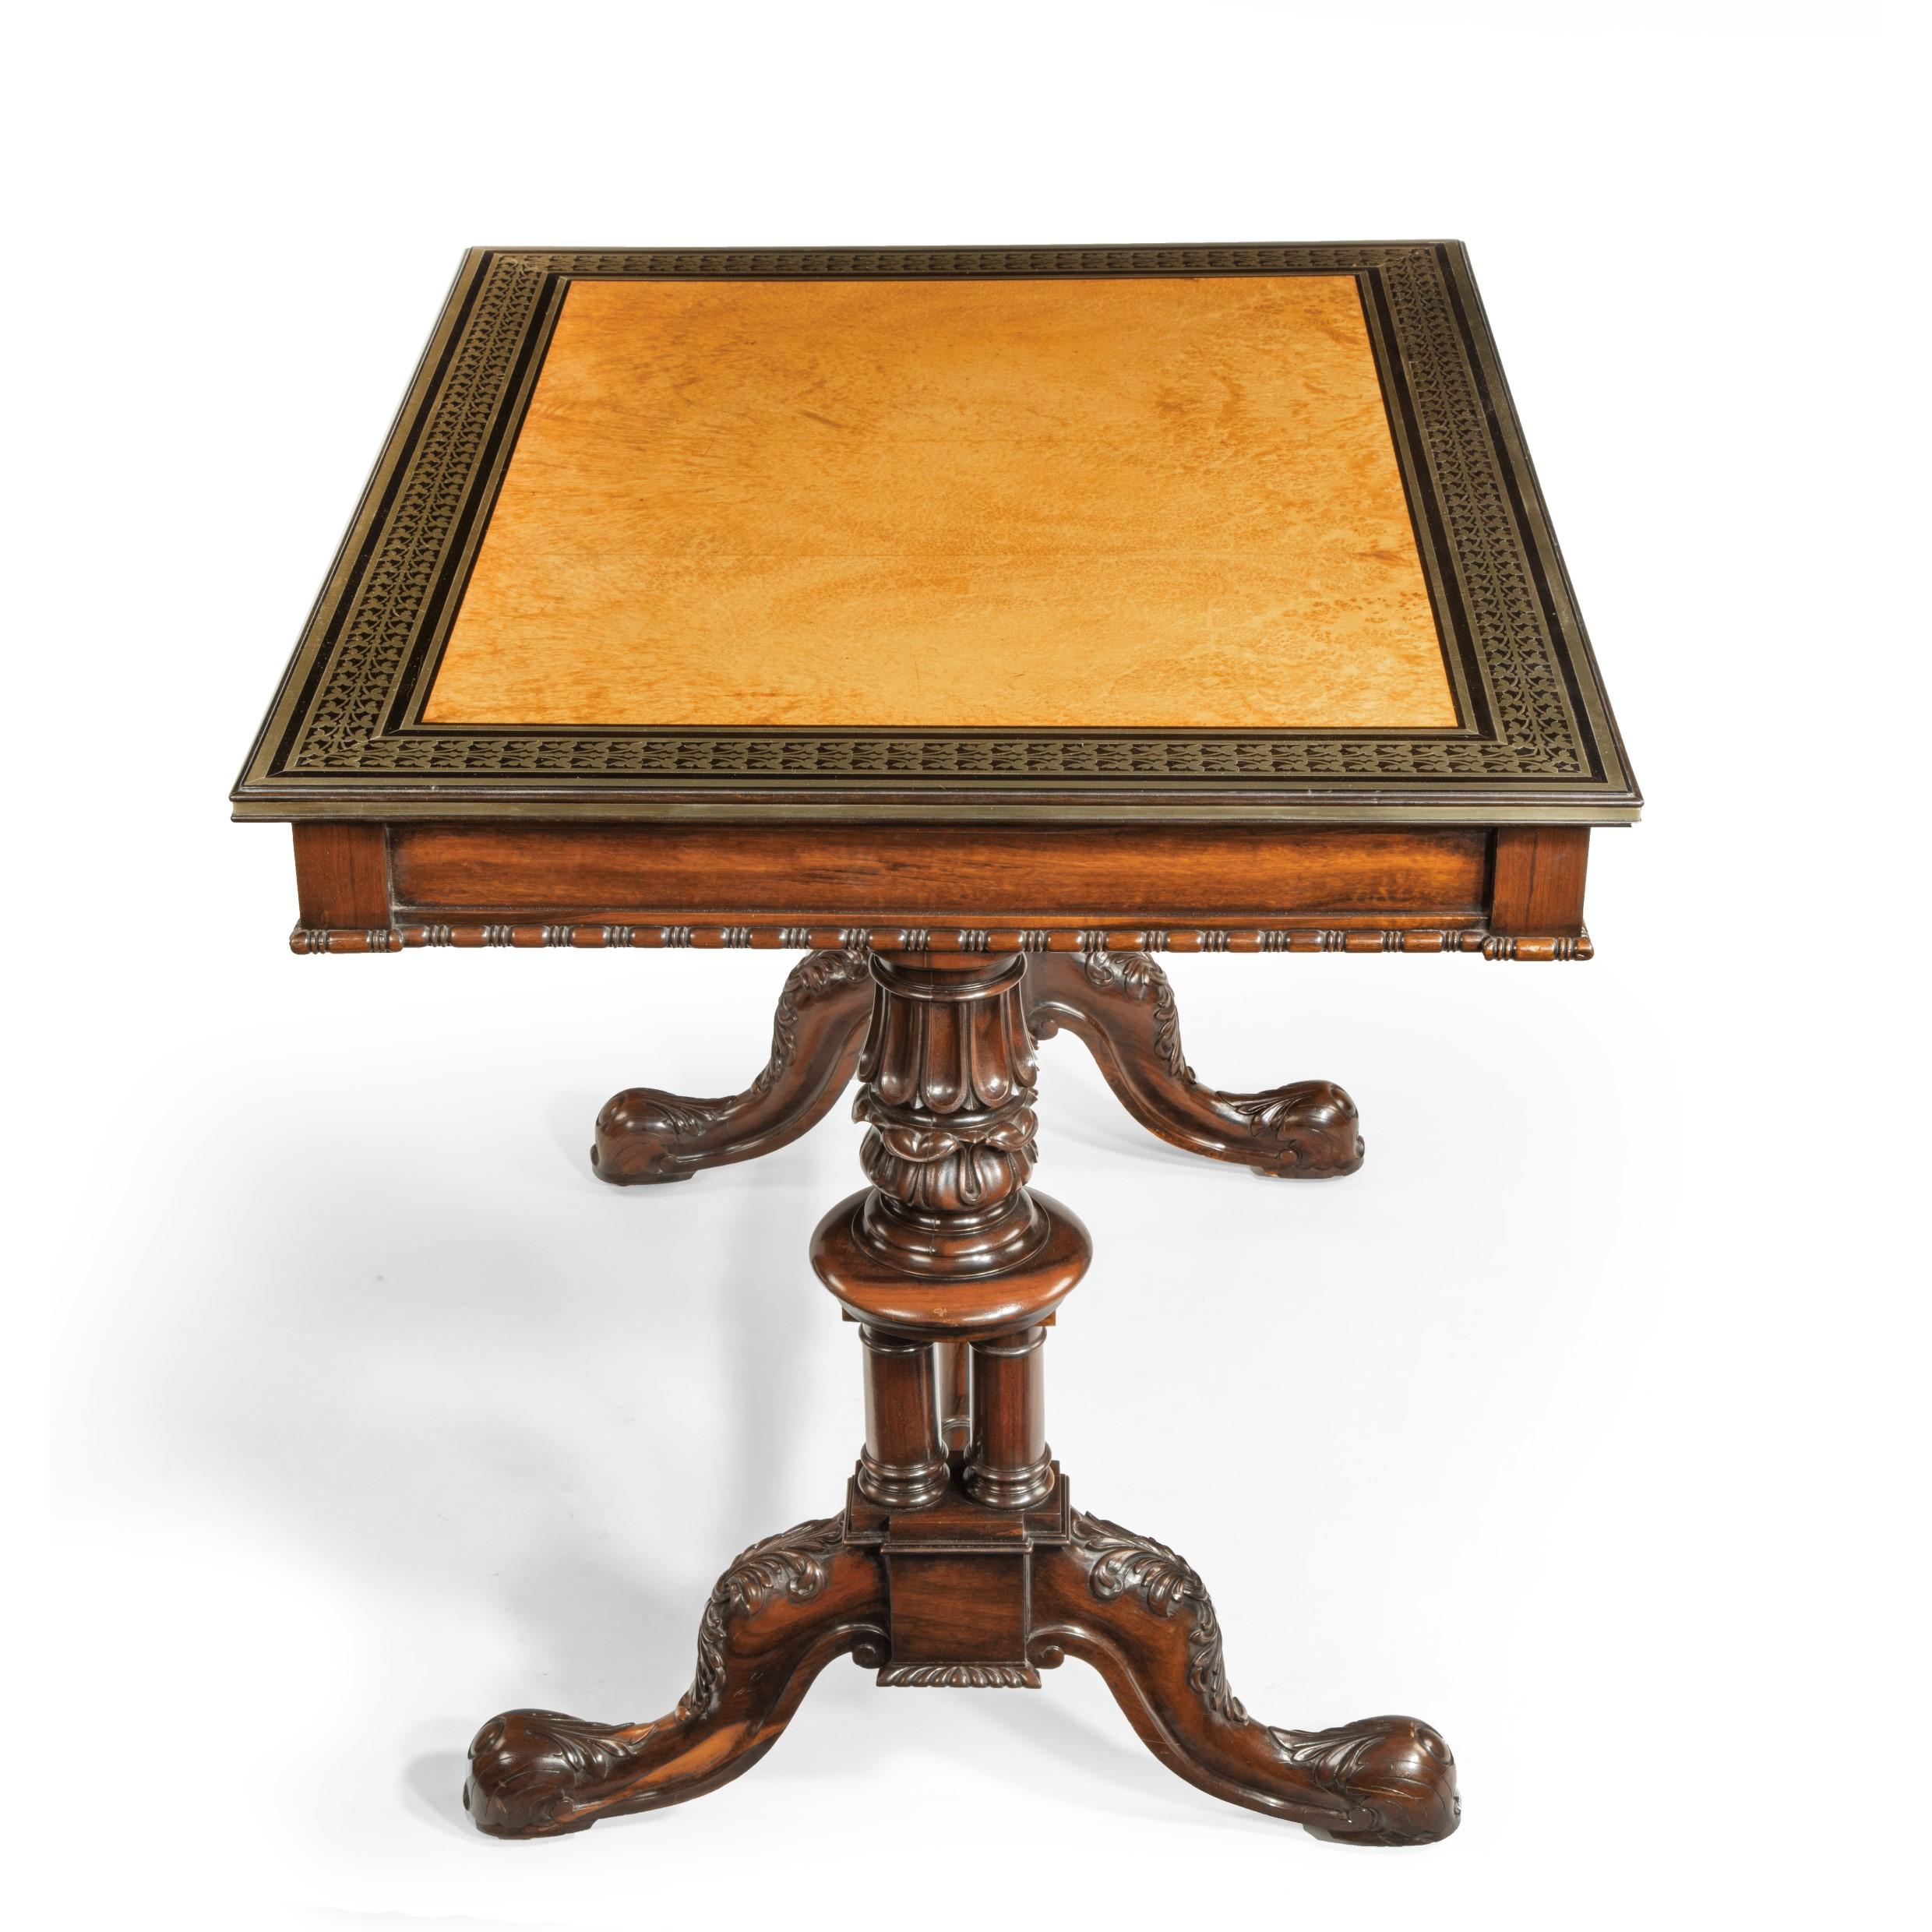 Striking Goncalo Alves 'Albuera Wood' Writing Table Attributed to Gillows In Good Condition For Sale In Lymington, Hampshire